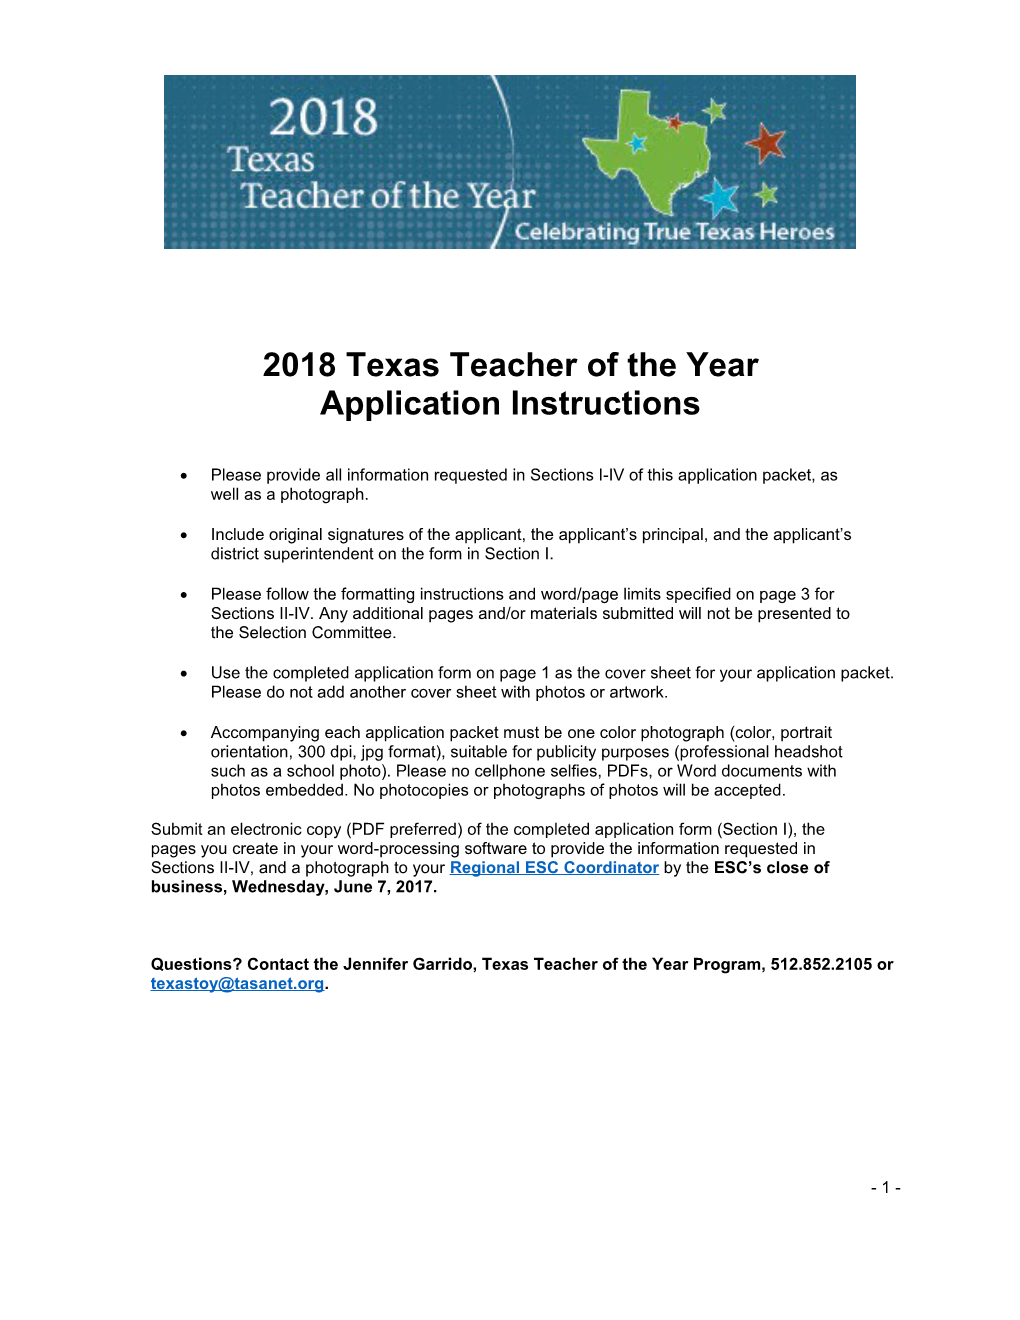 2018 Texas Teacher of the Year Application Instructions